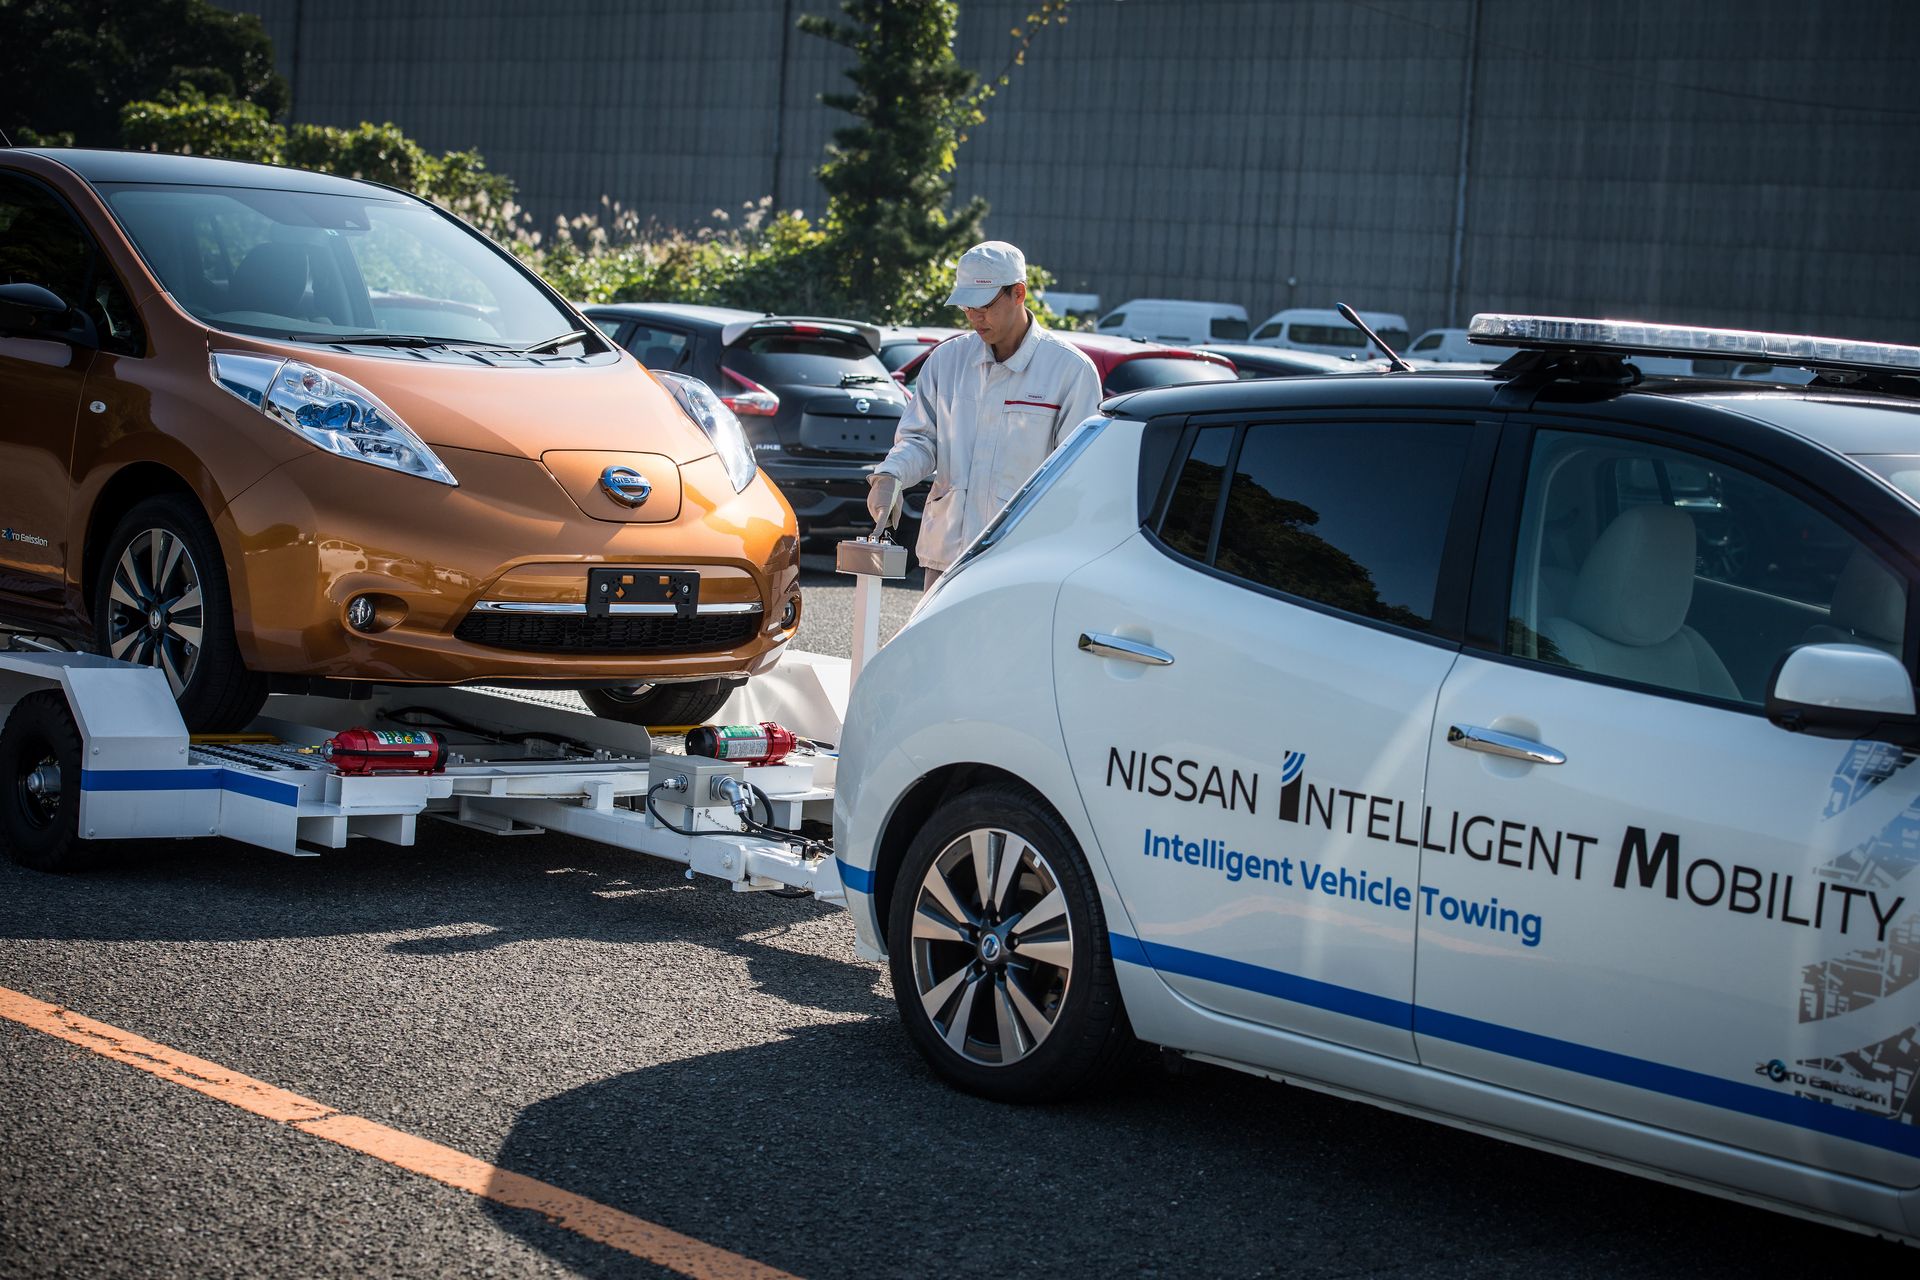 Nissan Intelligent Vehicle Towing